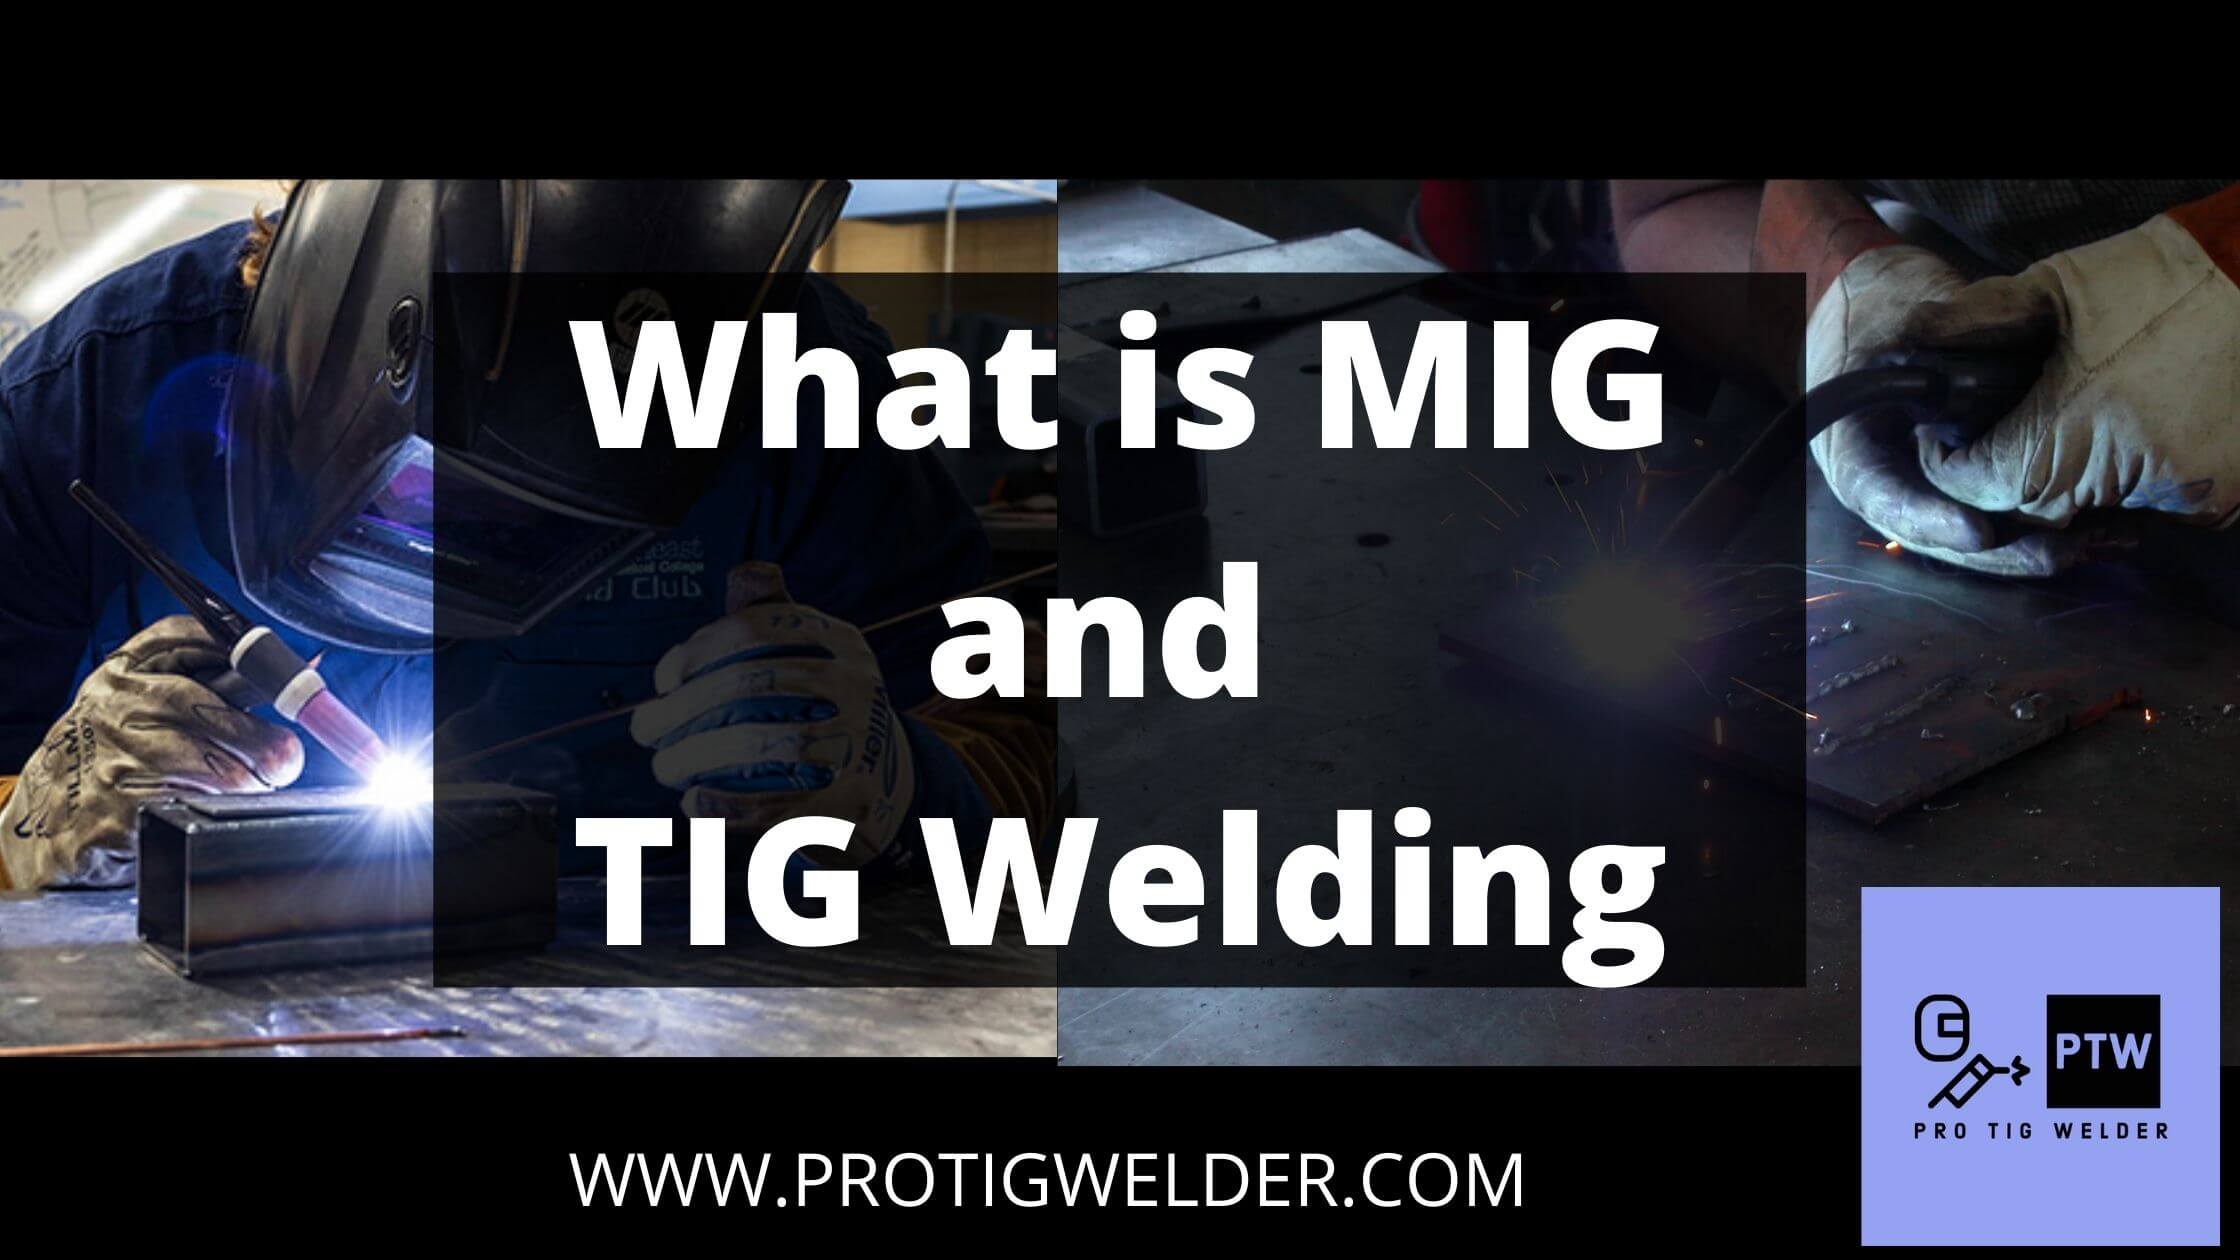 what is mig and tig welding (1)